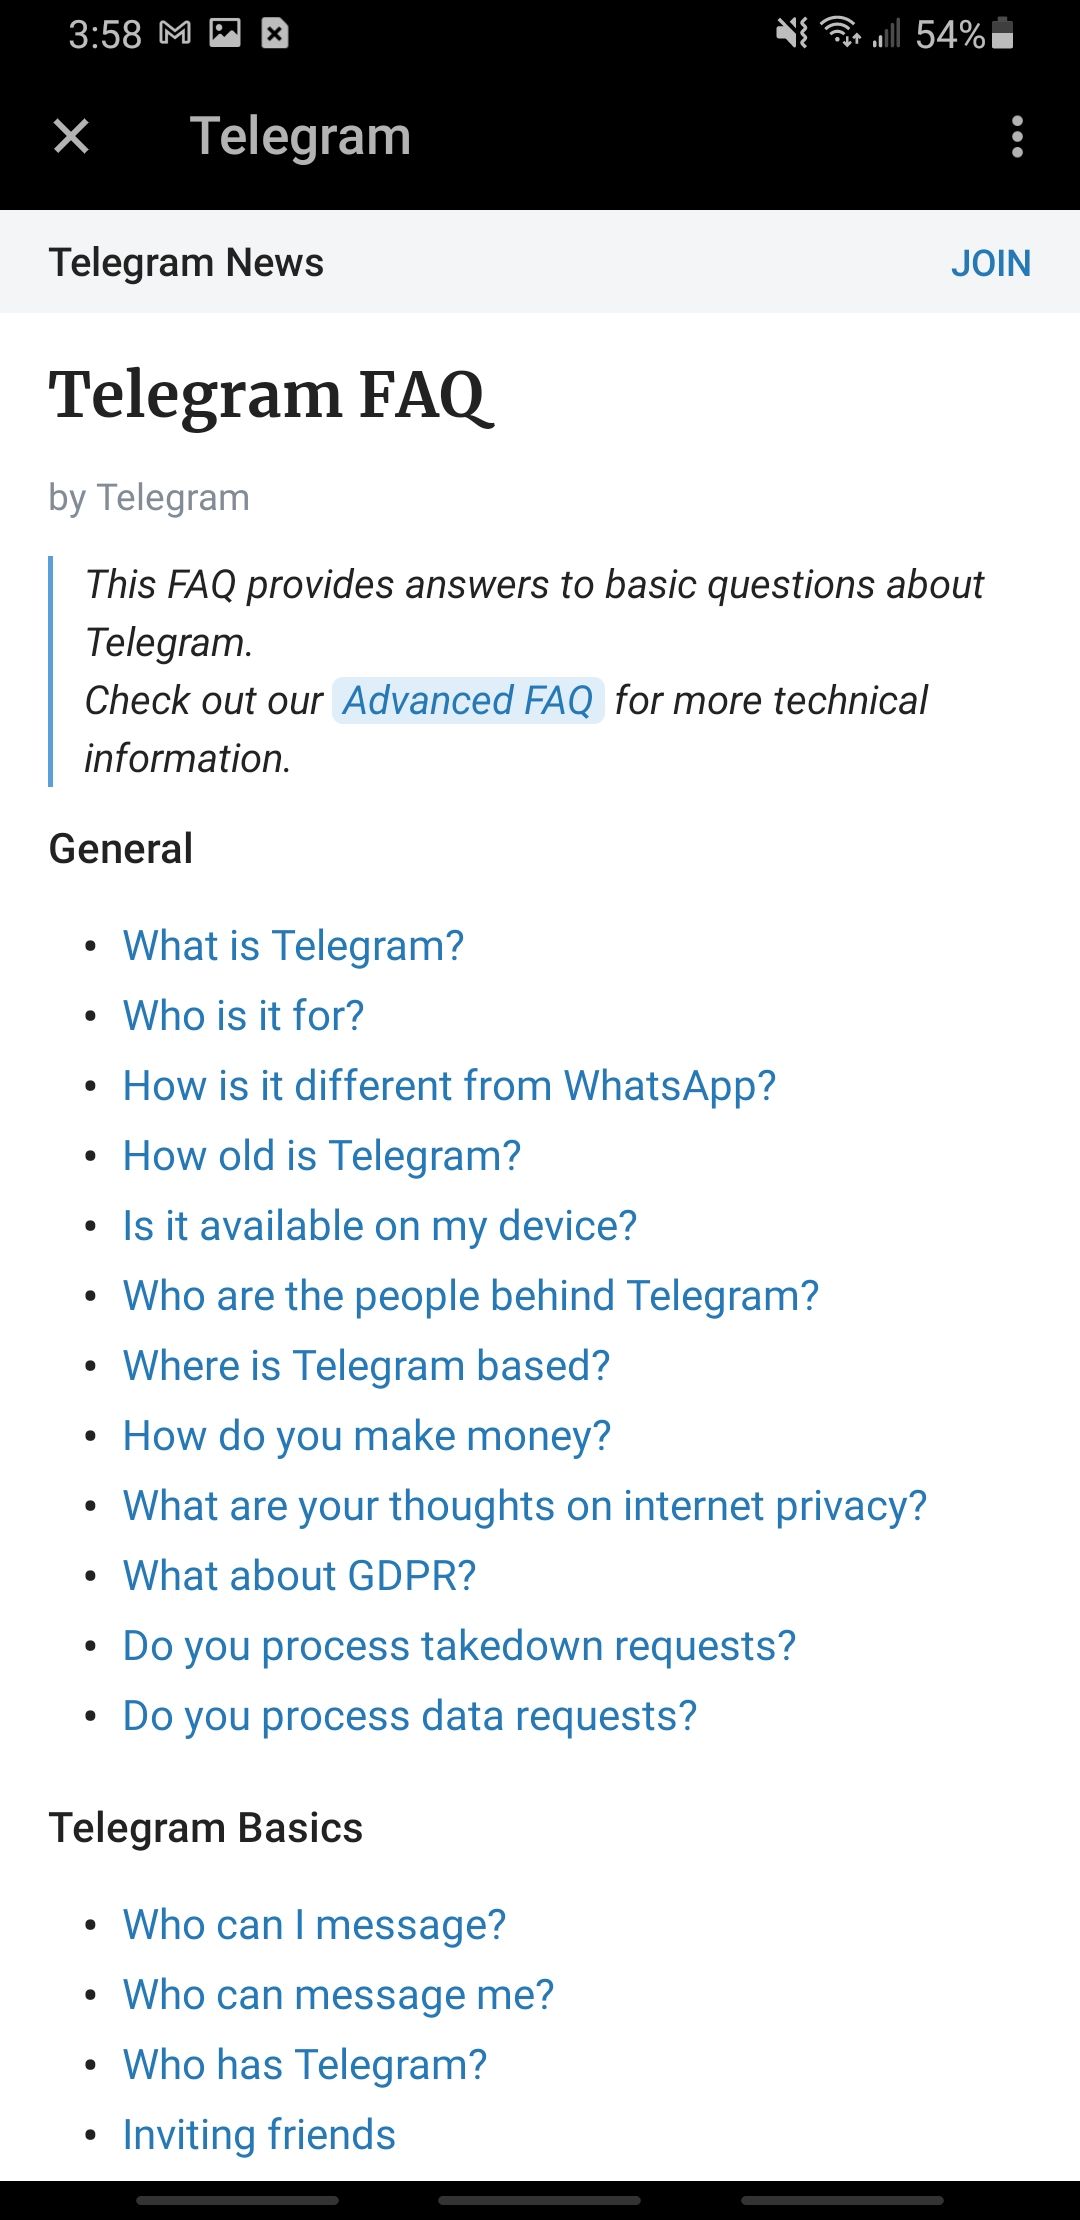 telegram app frequently asked questions page